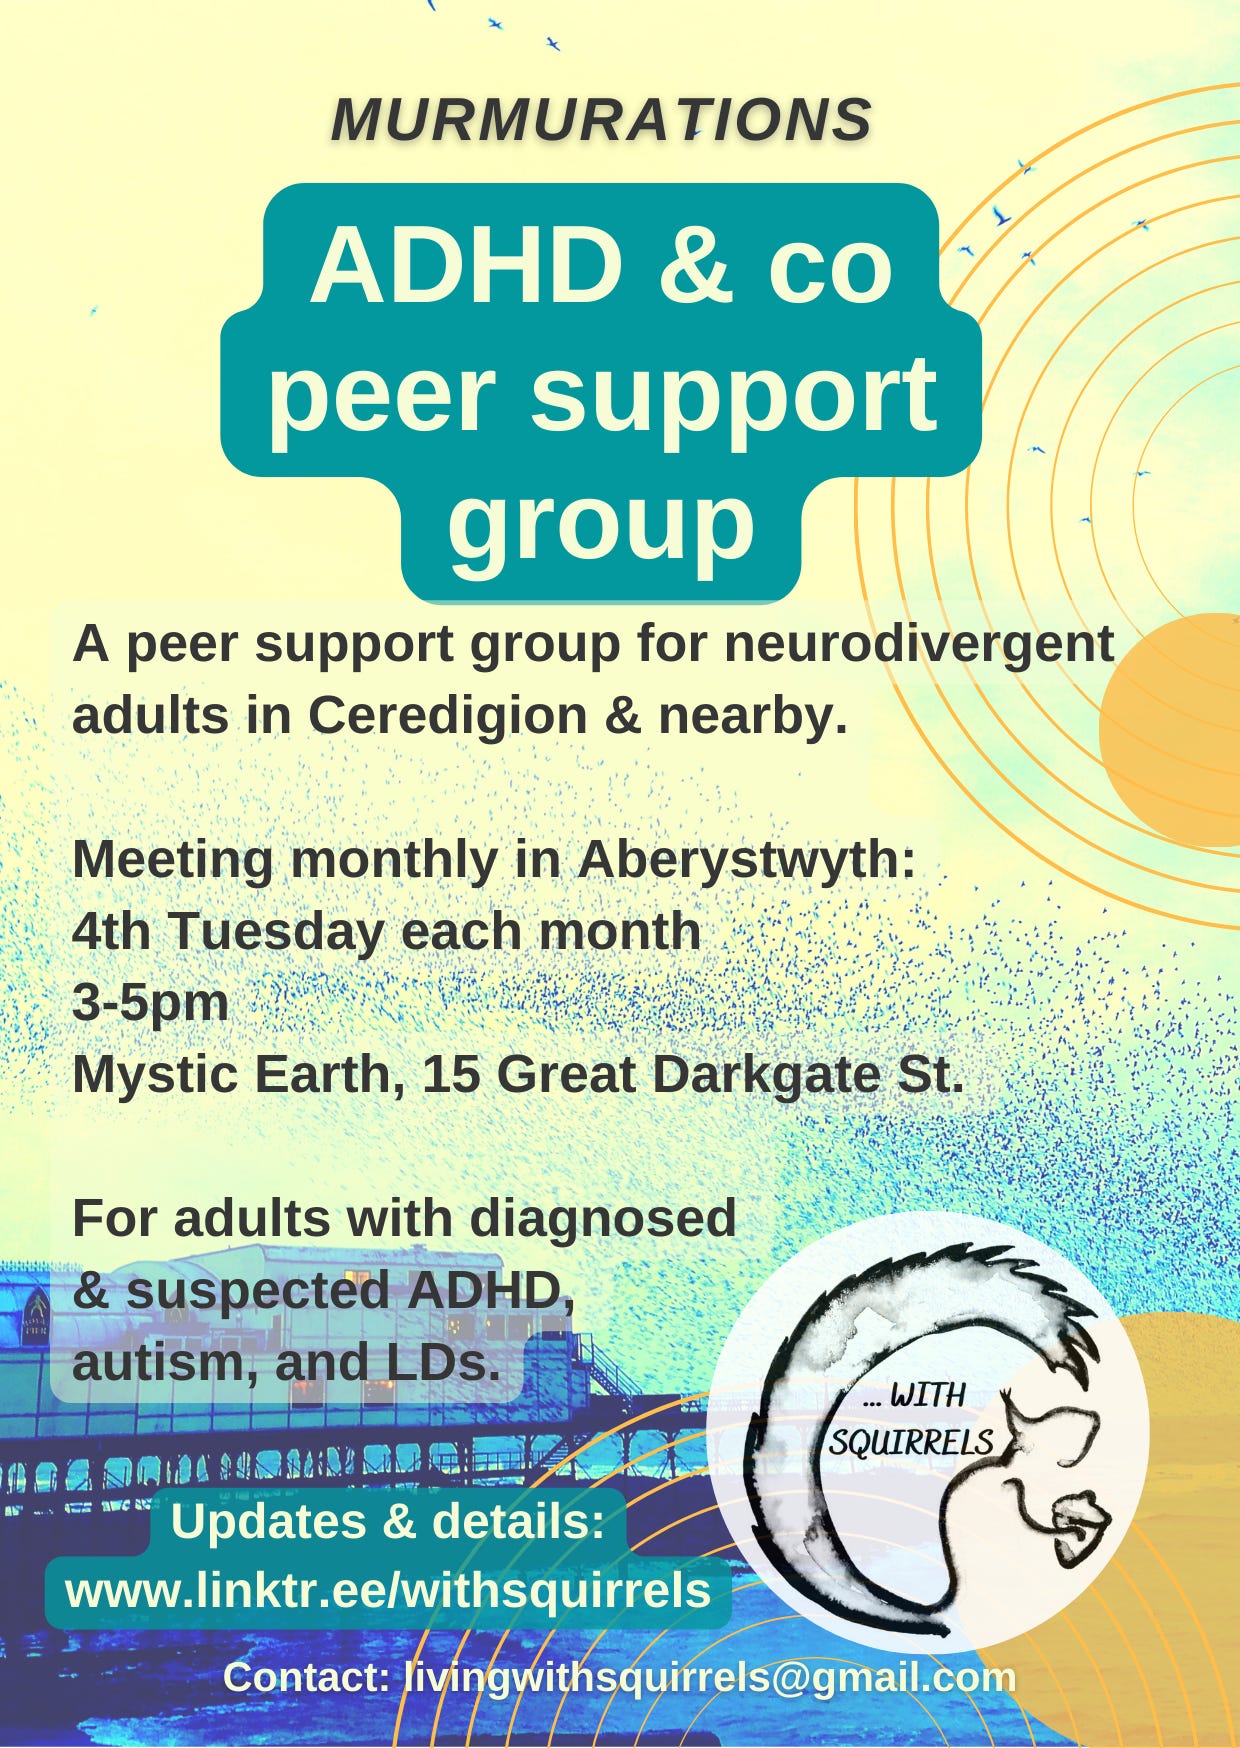 ADHD peer support group in Aberystwyth - self diagnosed and suspected neurodivergent folk welcome. 